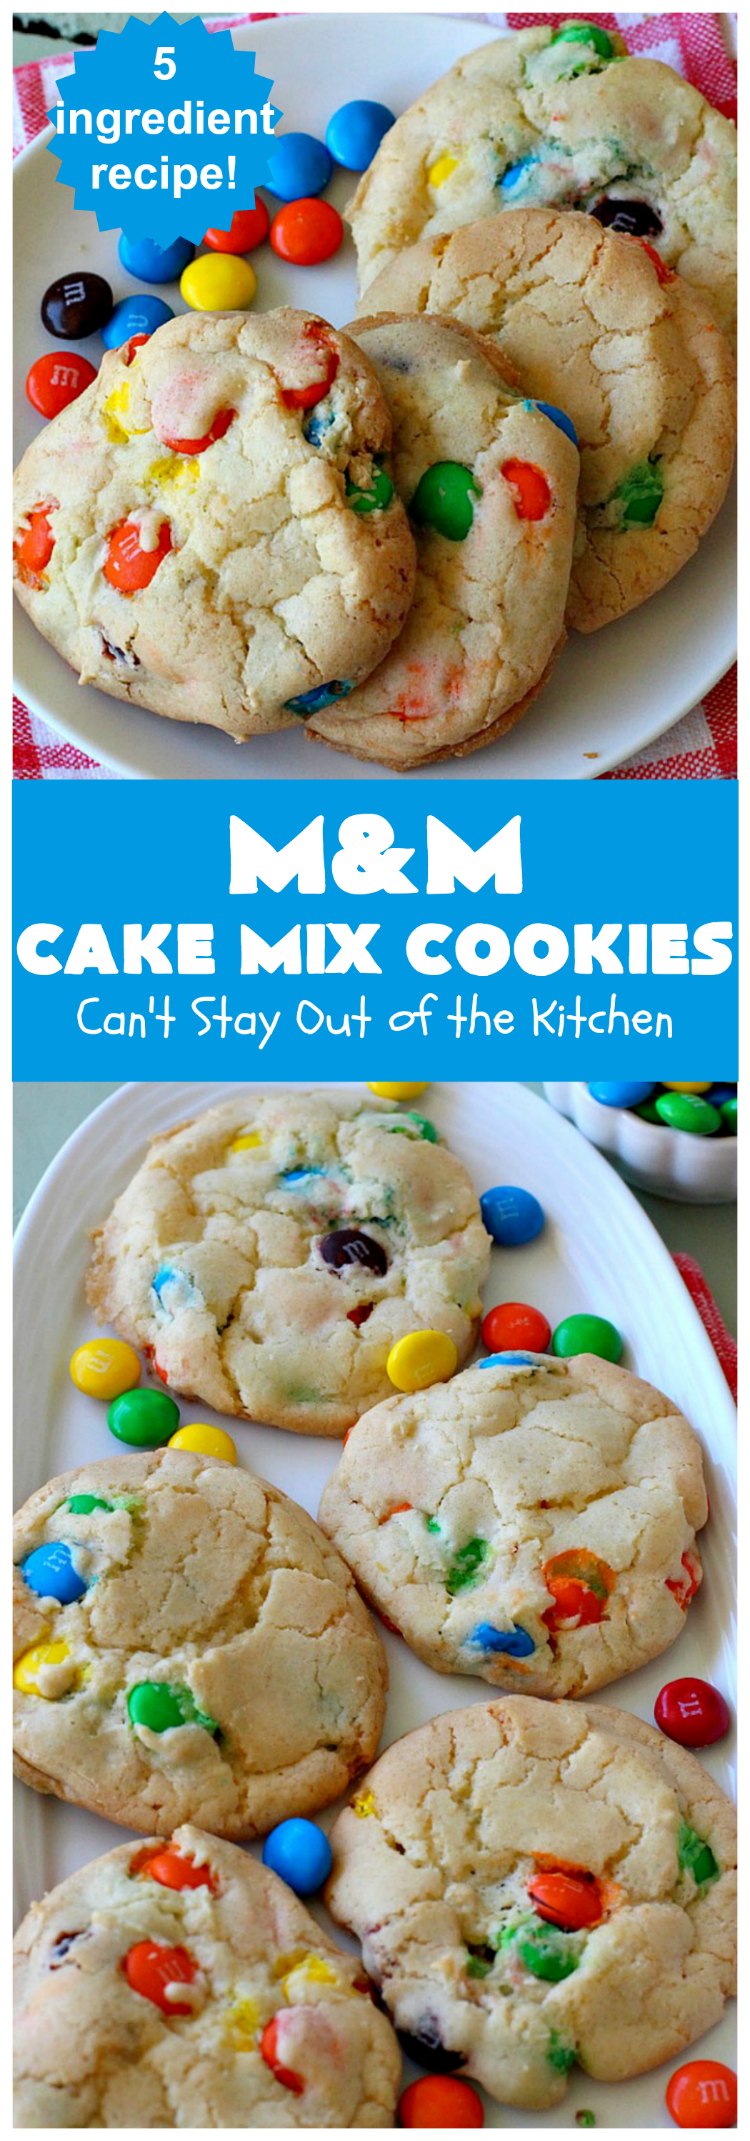 M&M Cake Mix Cookies | Can't Stay Out of the Kitchen